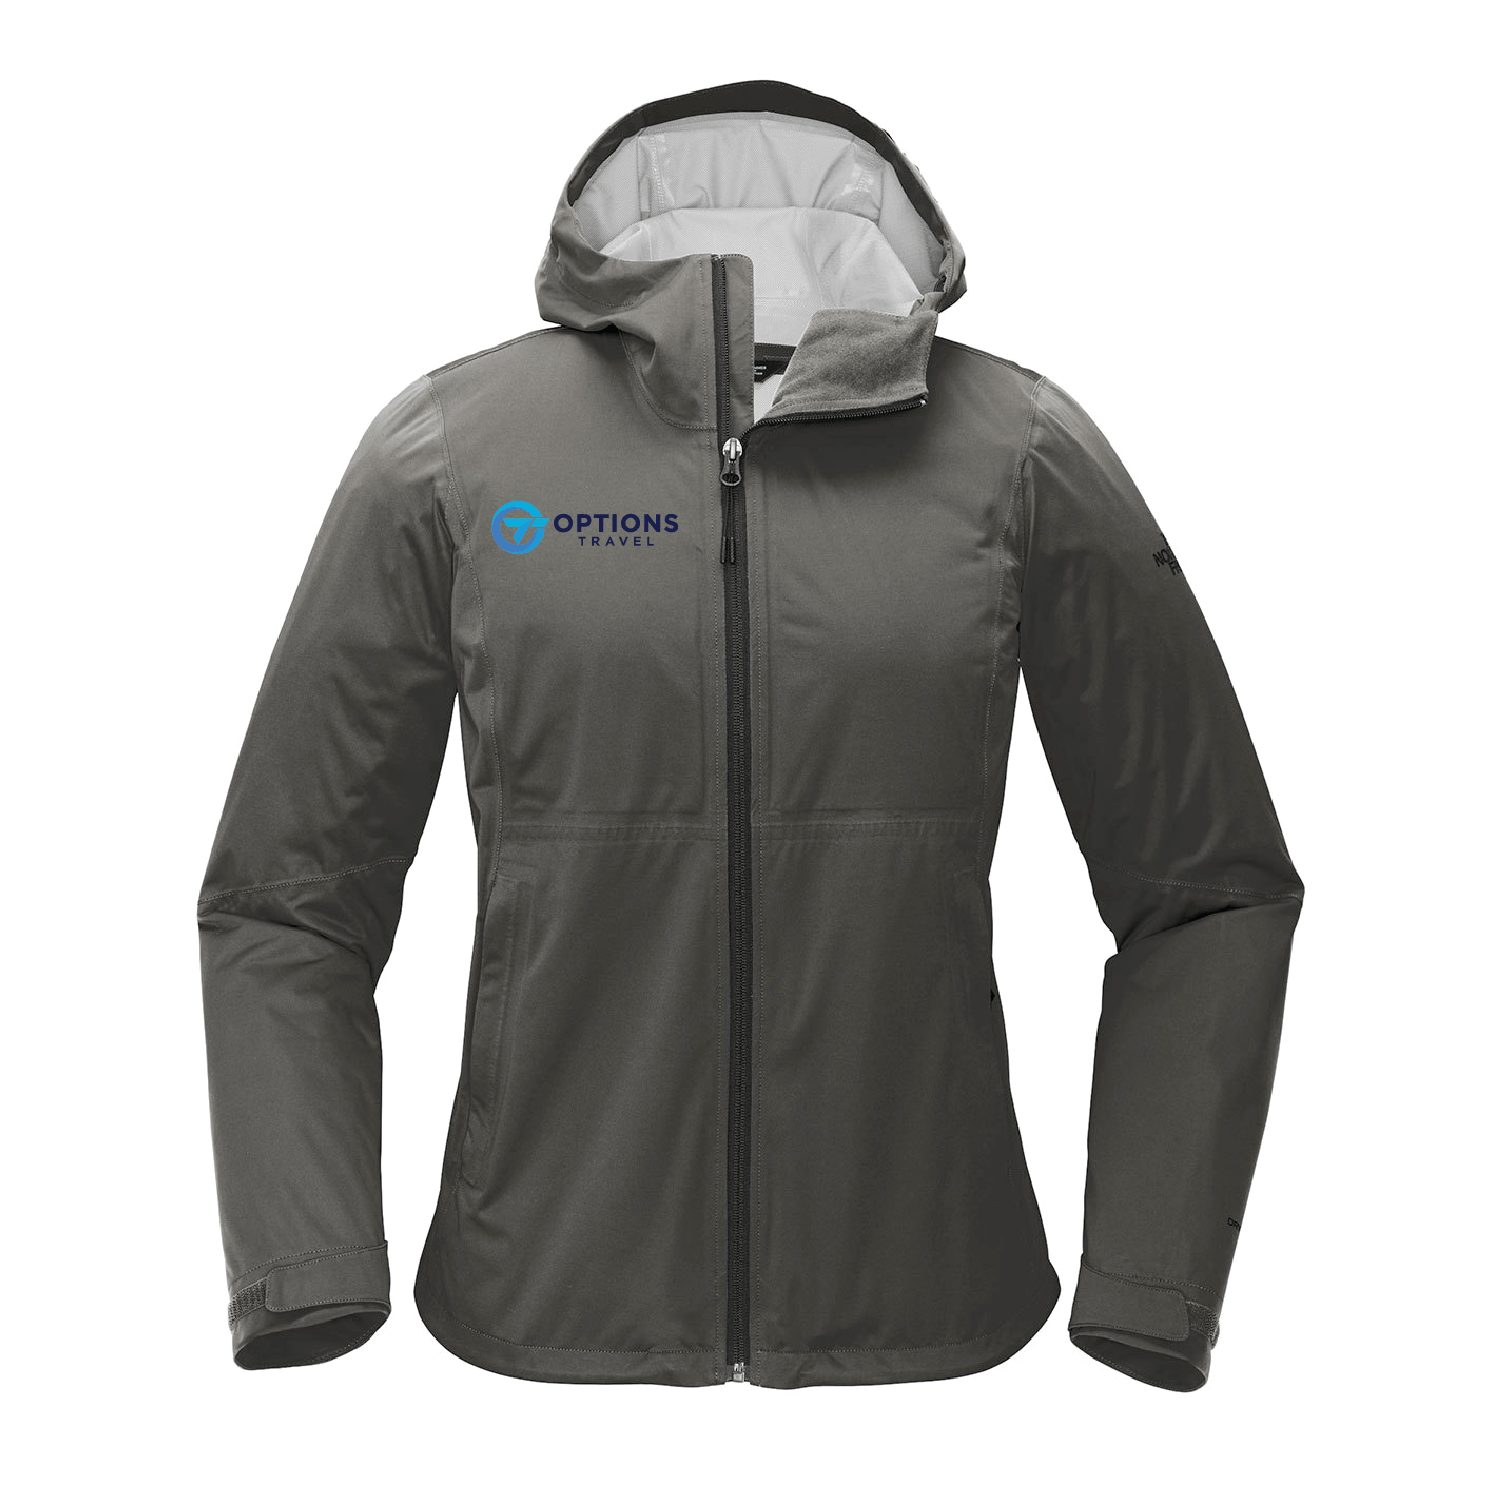 Options Travel The North Face ® Ladies All-Weather DryVent ™ Stretch Jacket - DSP On Demand